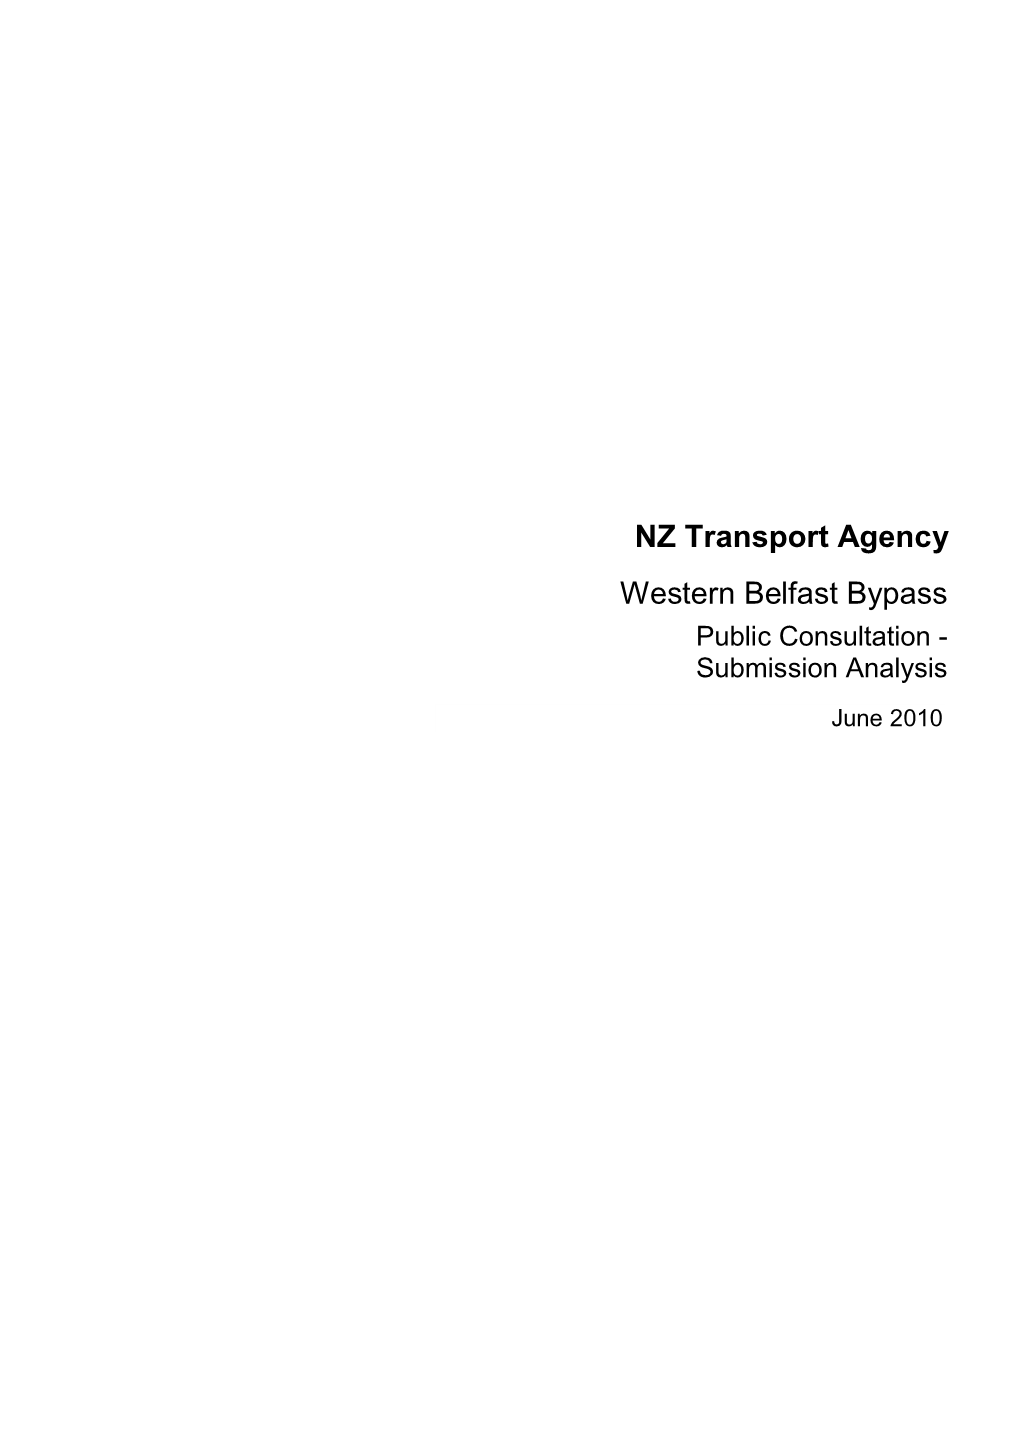 NZ Transport Agency Western Belfast Bypass Public Consultation - Submission Analysis